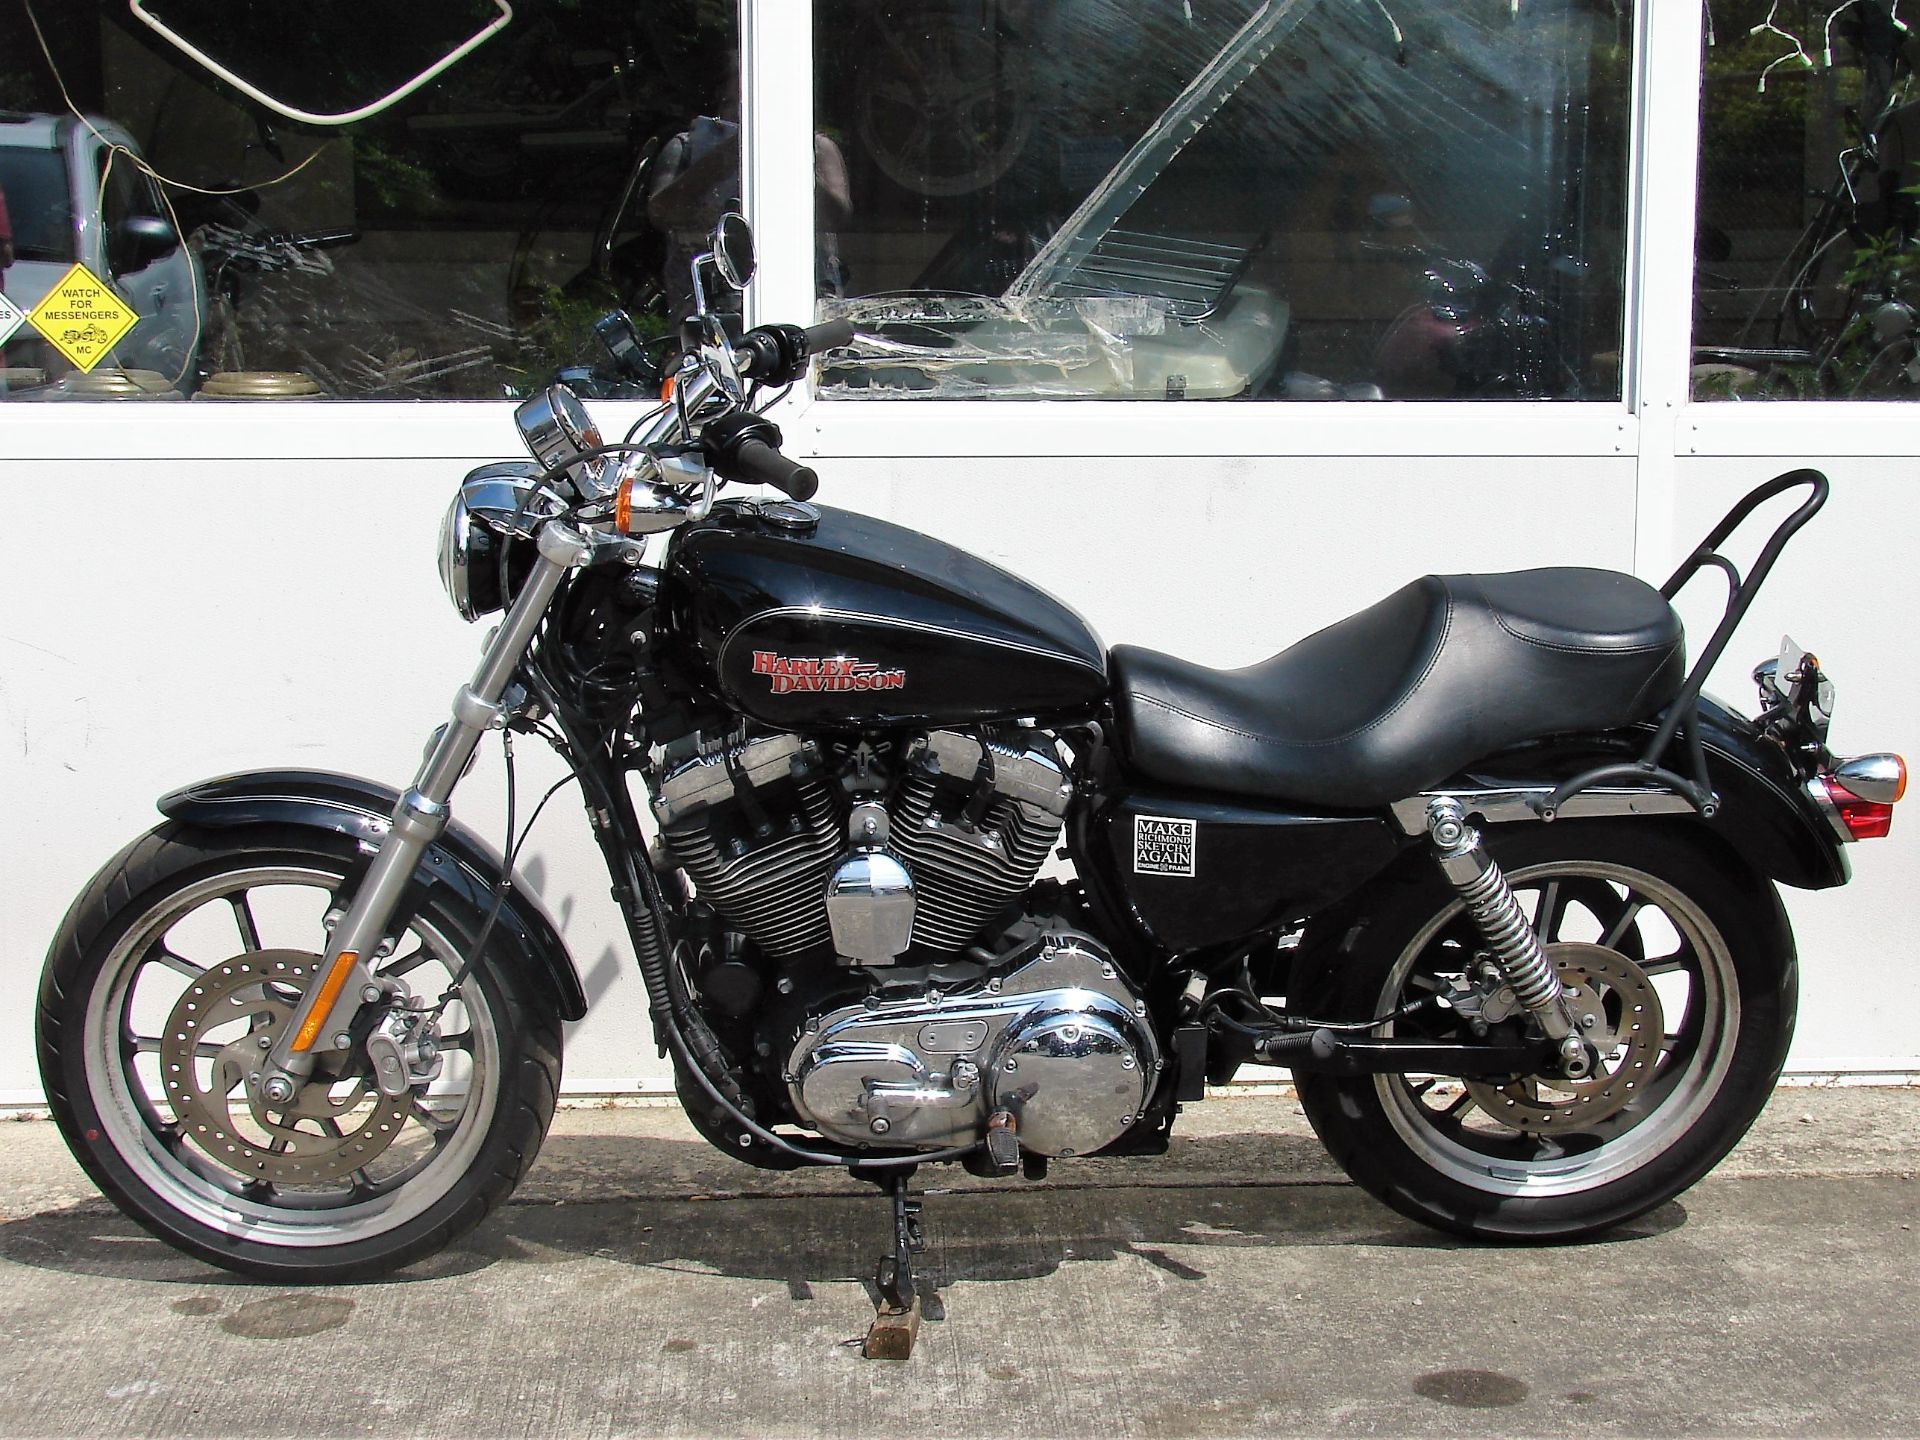 2014 Harley-Davidson XL 1200 T Super Low Sportster in Williamstown, New Jersey - Photo 6